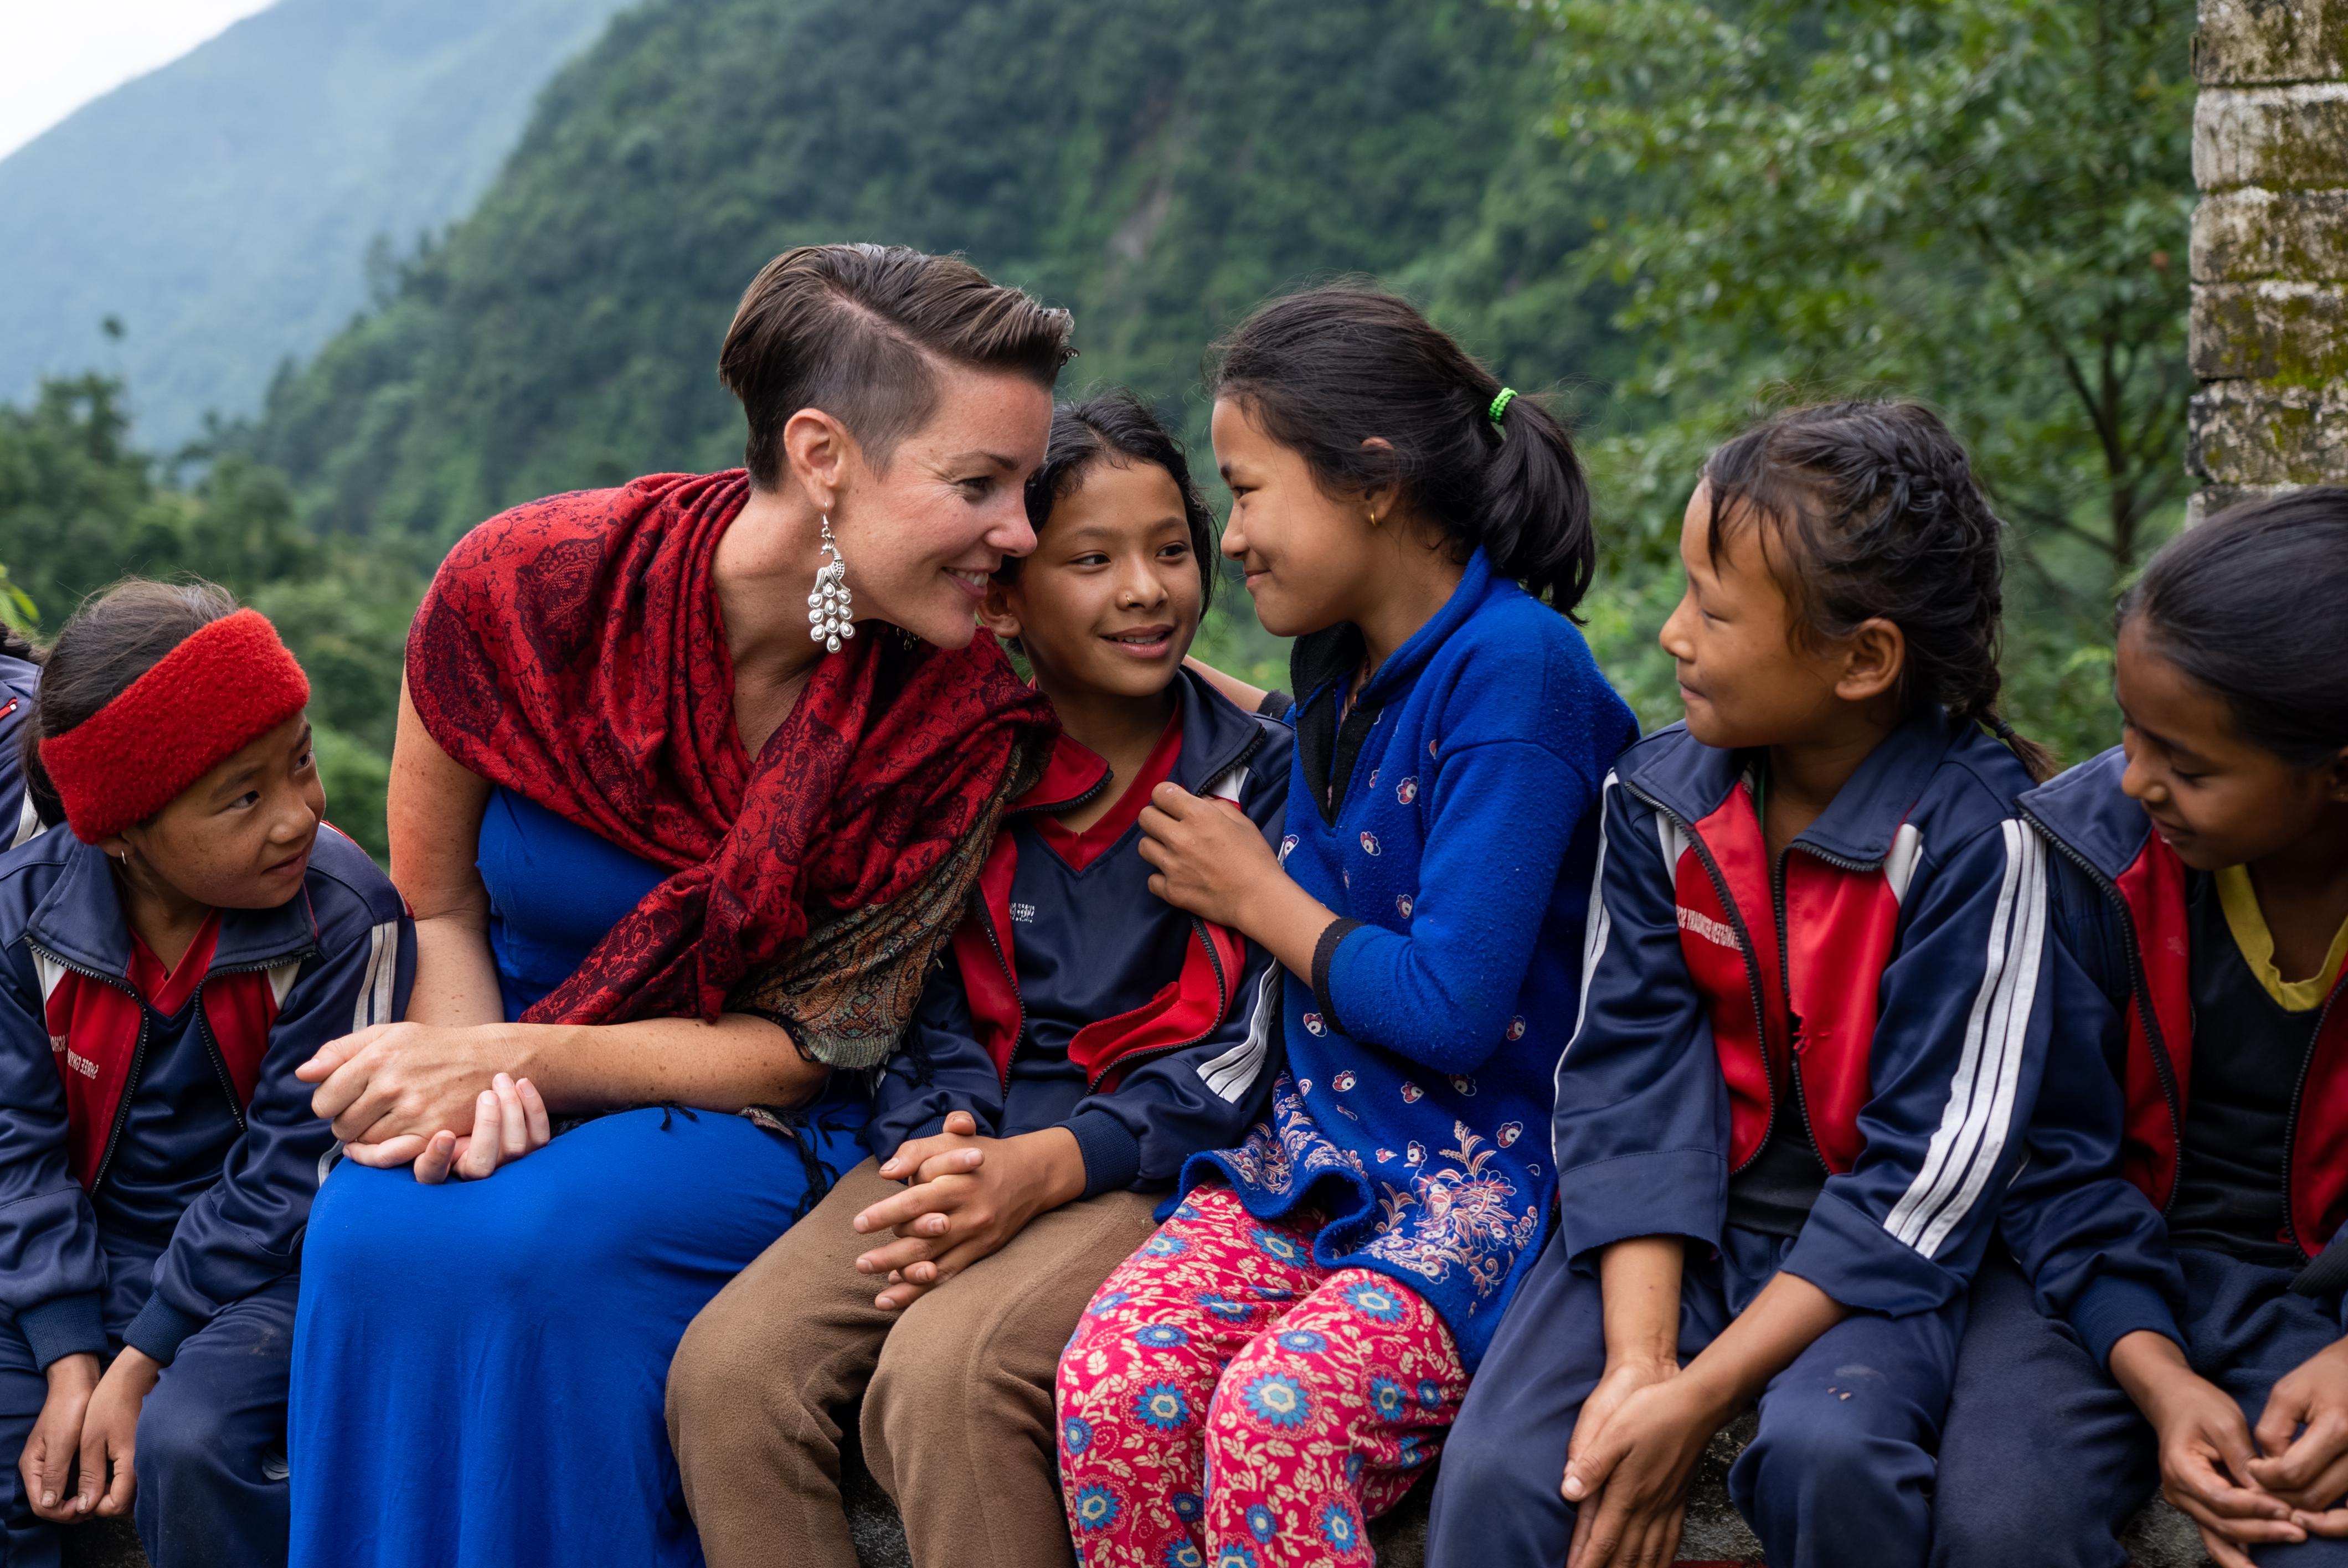 Working with orphans in Nepal